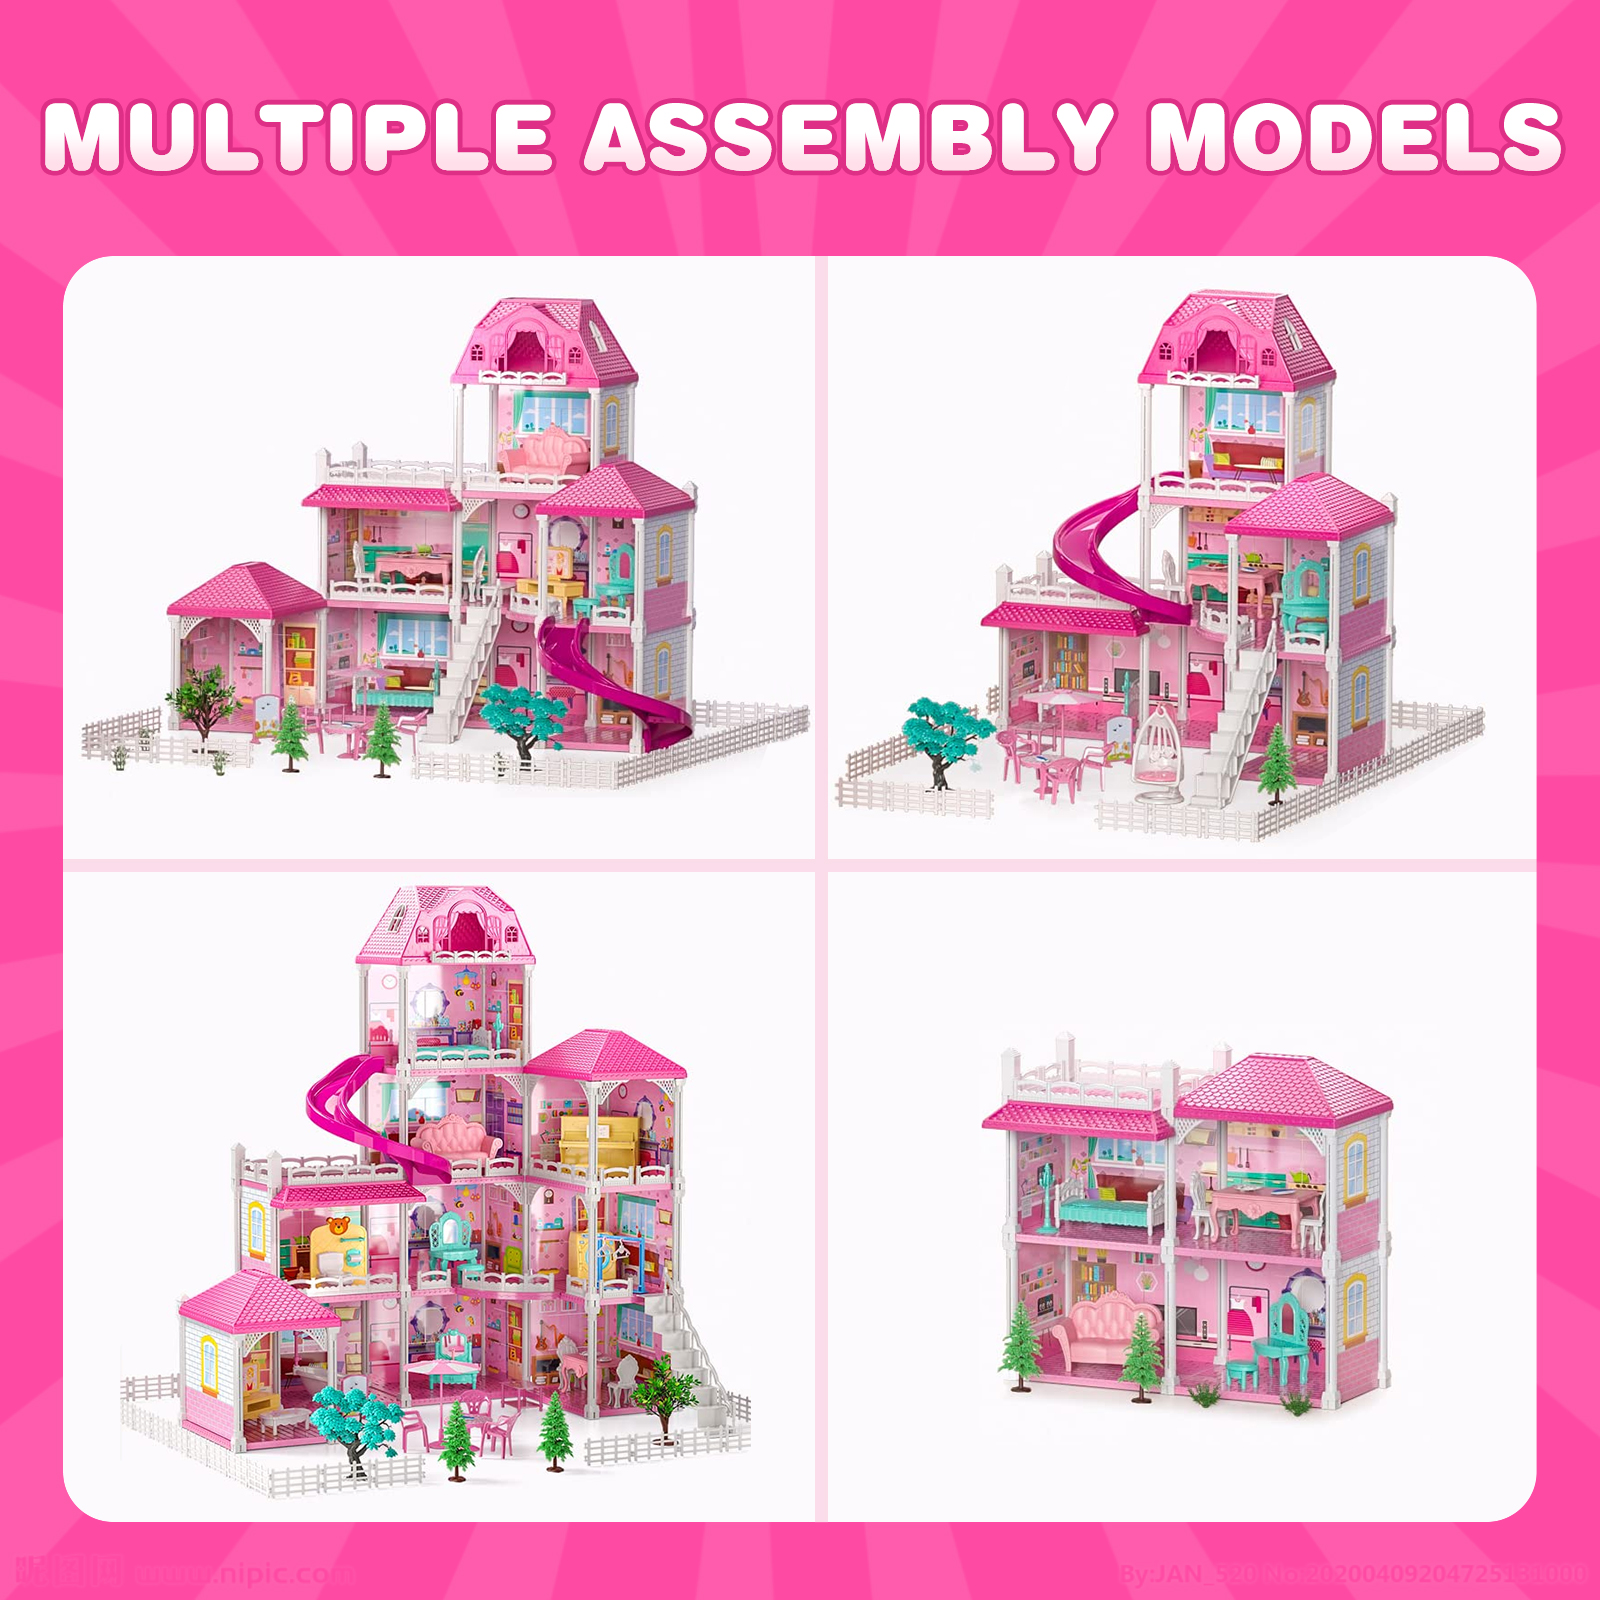 Hot Bee Dollhouse for Girls,4-Story 12 Rooms Playhouse with 2 Dolls Toy Figures,Pretend Dreamhouse with Accessories,Gift Toy for Kids Ages 3 4 5 6 - image 5 of 7